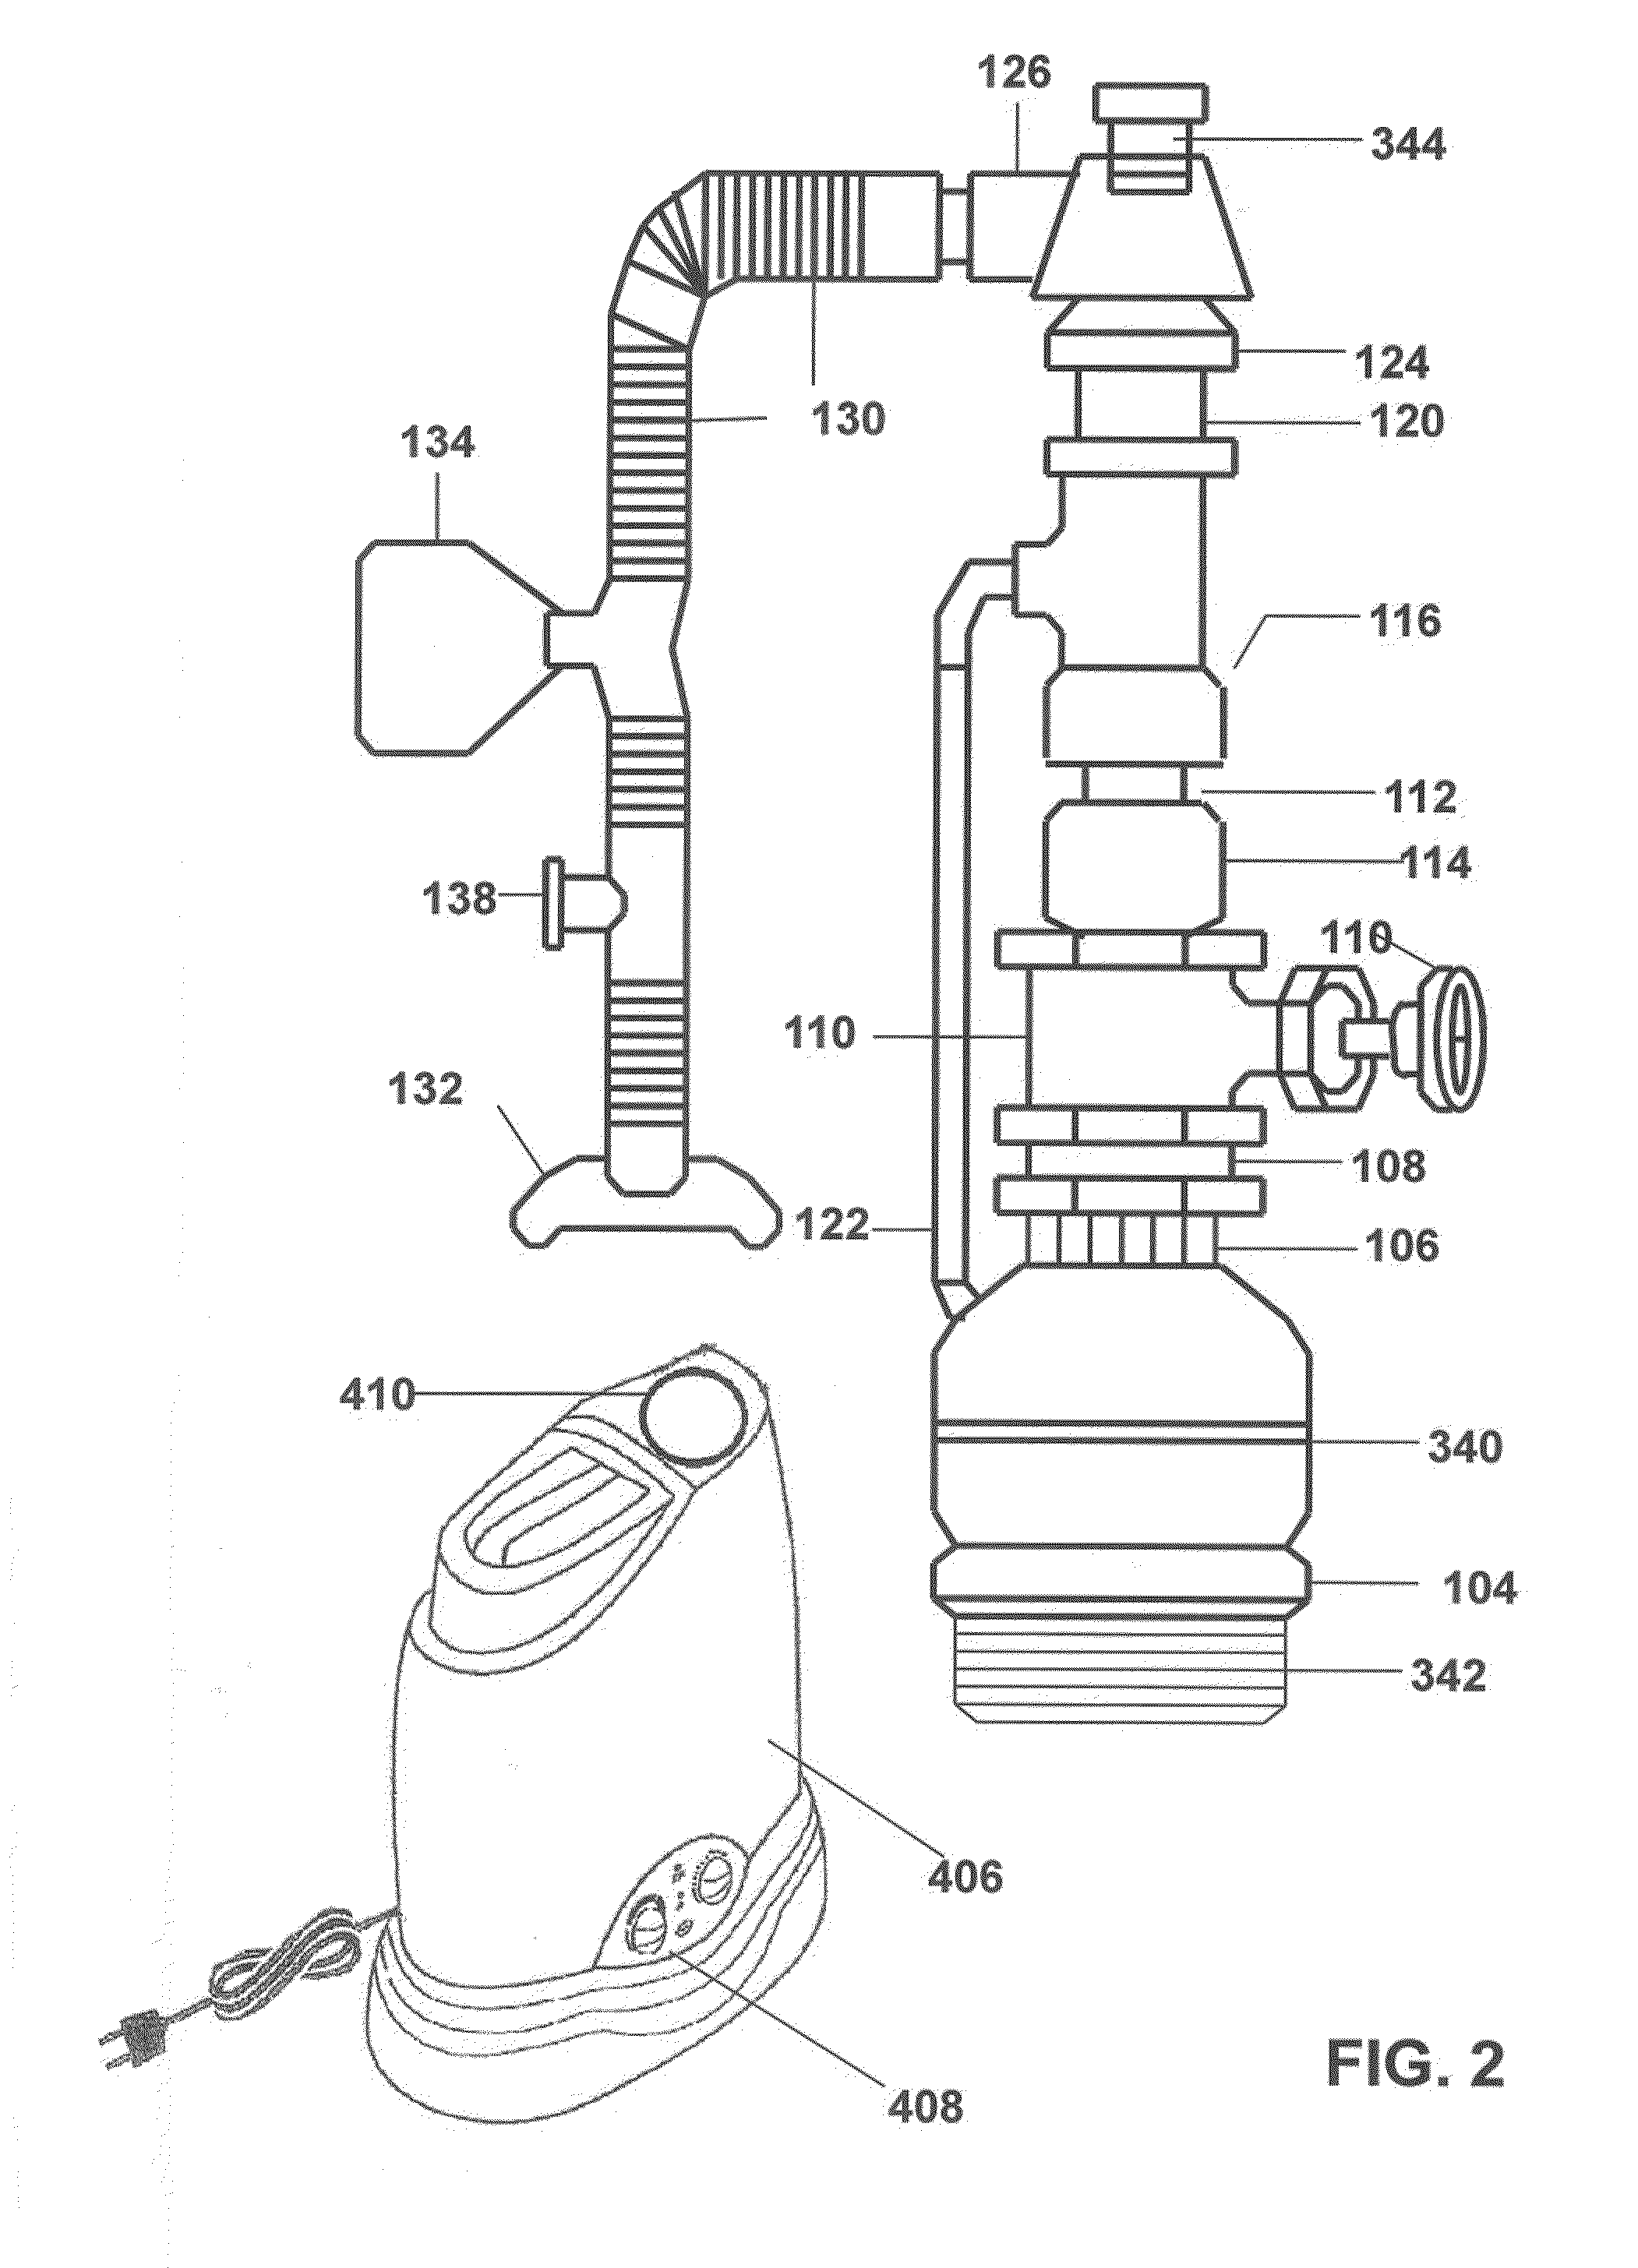 Controller device, system and method for improved patient respitory care